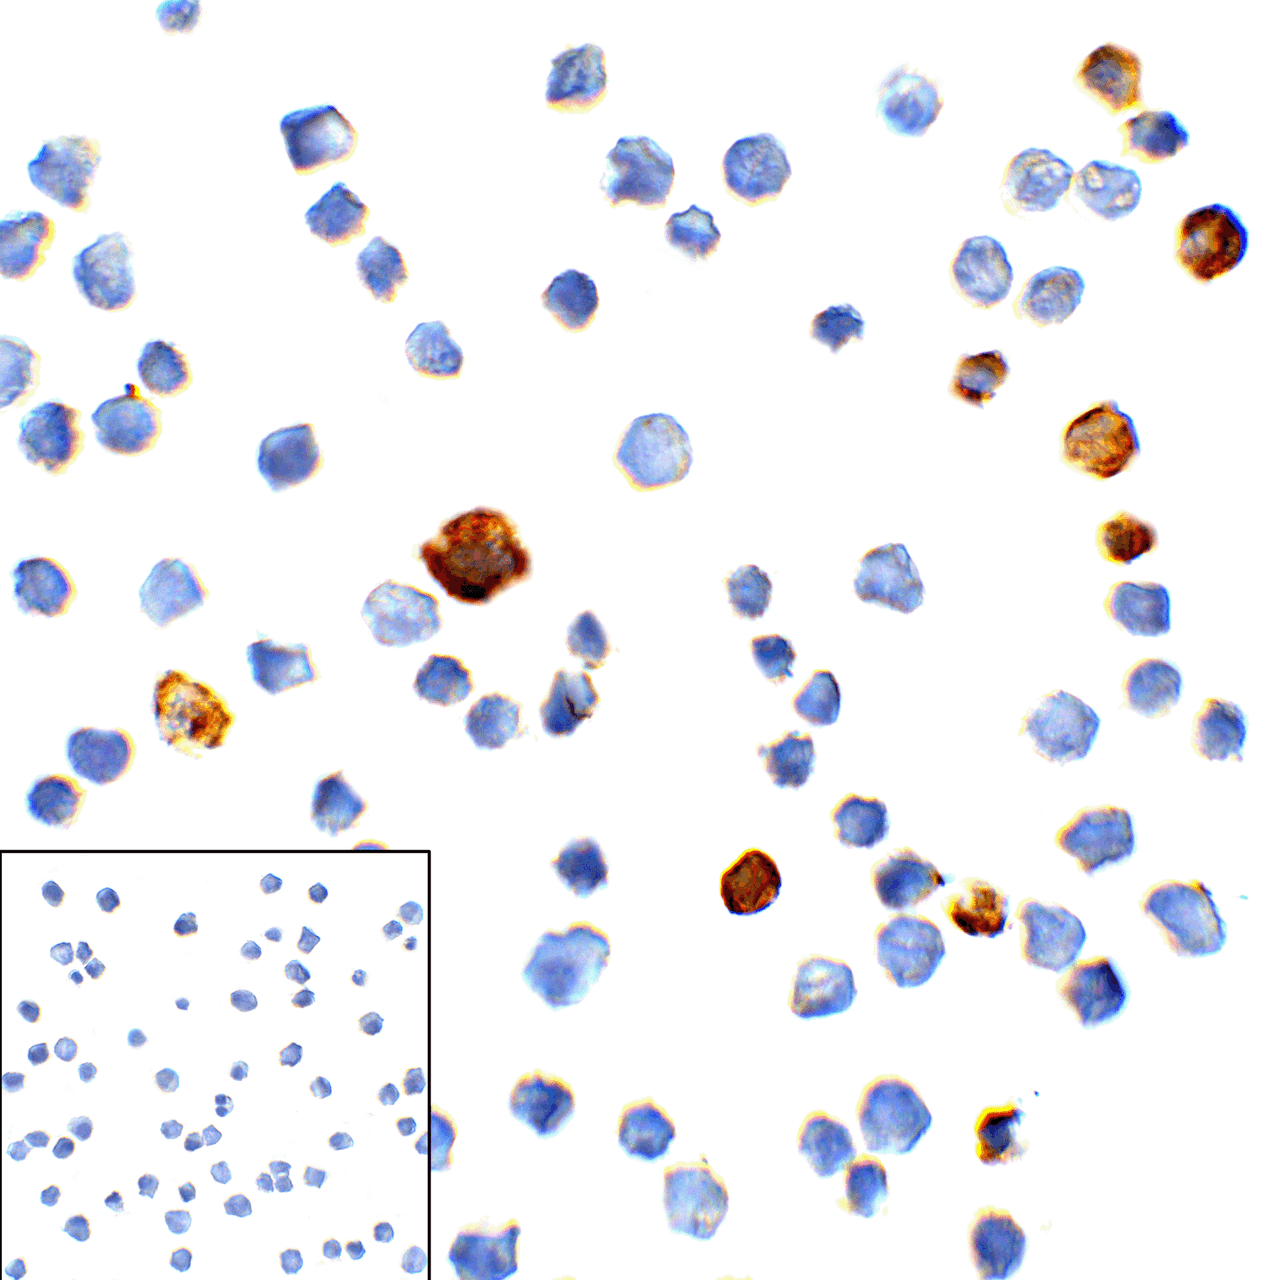 Immunocytochemistry of TIM-3 in transfected HEK293 cells with TIM-3 antibody at 1 ug/mL. Lower left: Immunocytochemistry in transfected HEK293 cells with control mouse IgG antibody at 1 ug/mL.